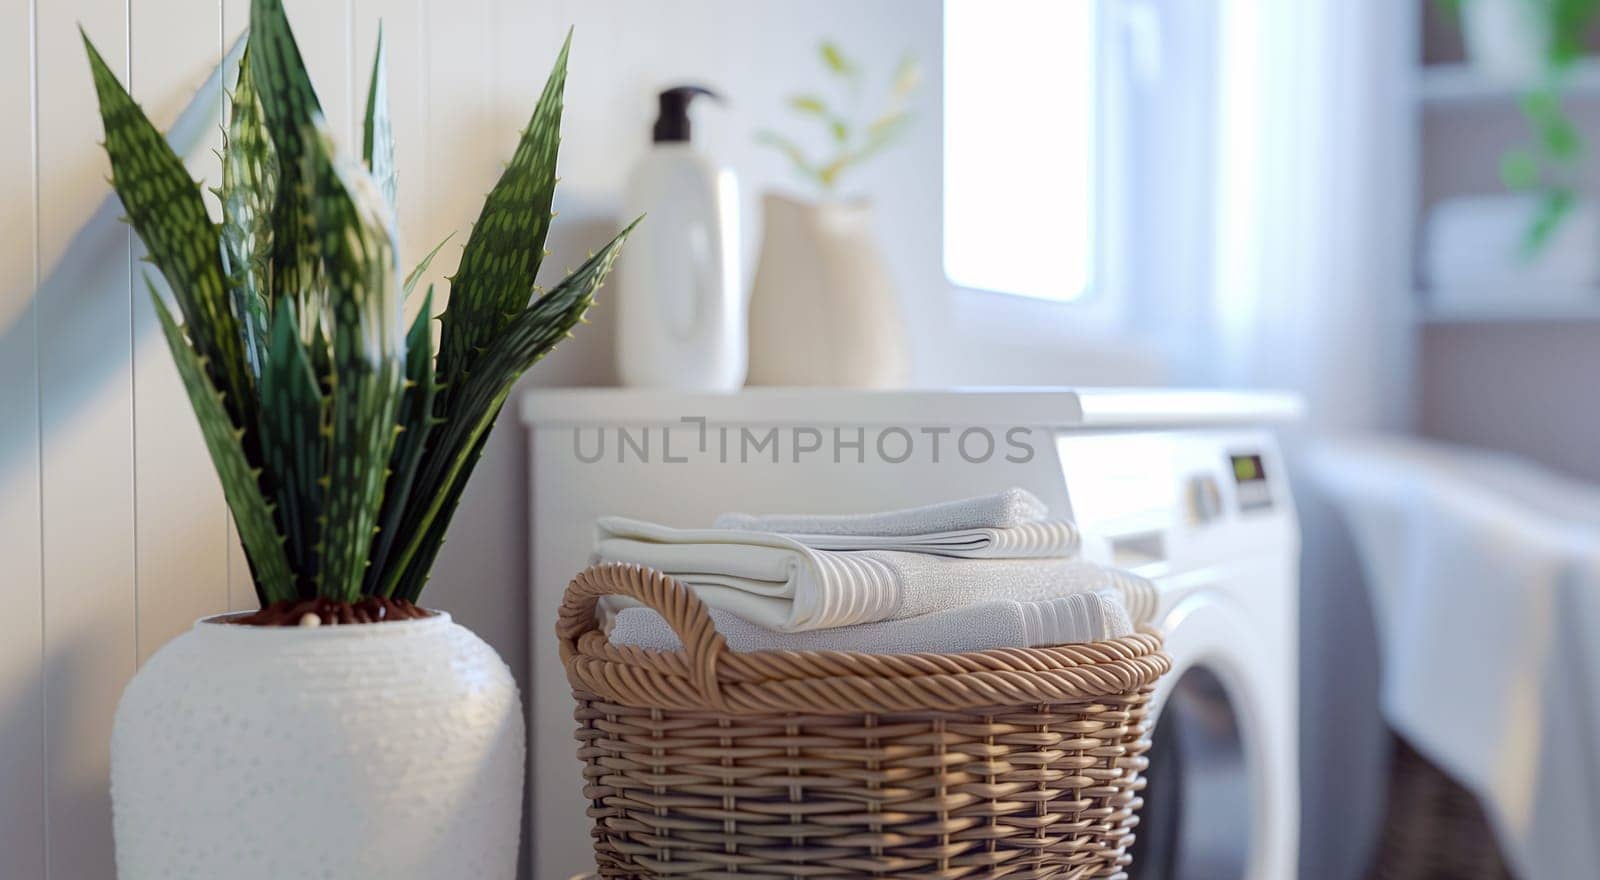 Cozy laundry room with fresh towels in basket, houseplant, and modern washing machine. by kizuneko